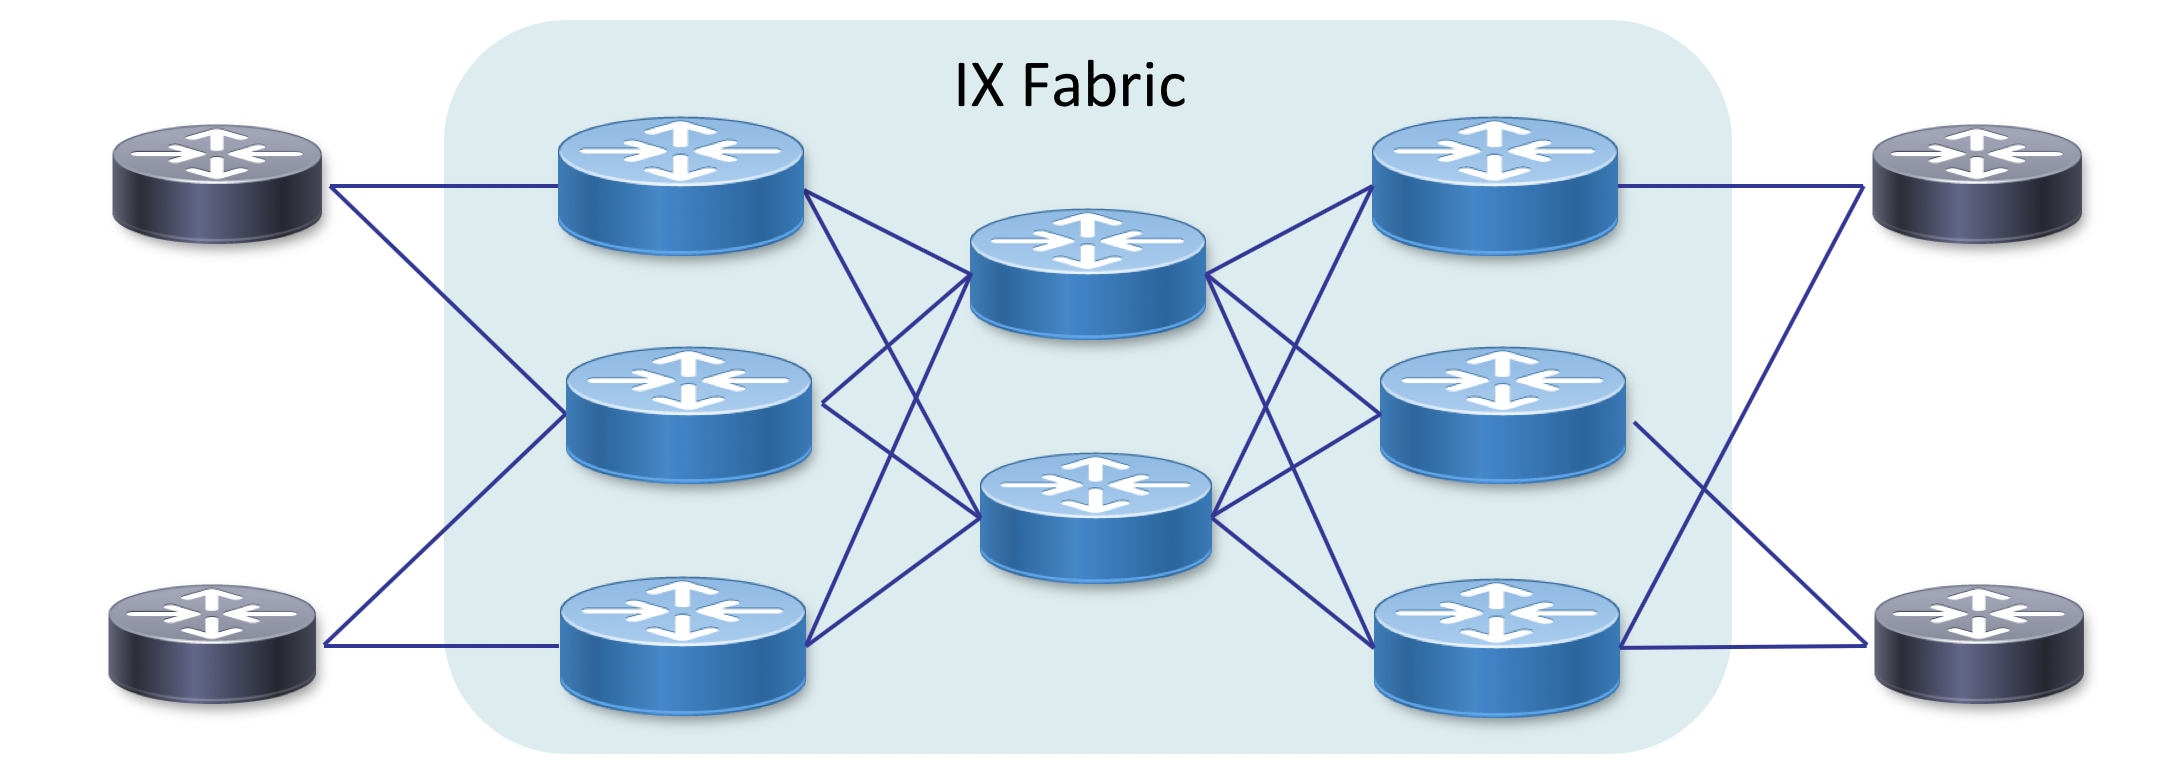 ixp-scale-out.png